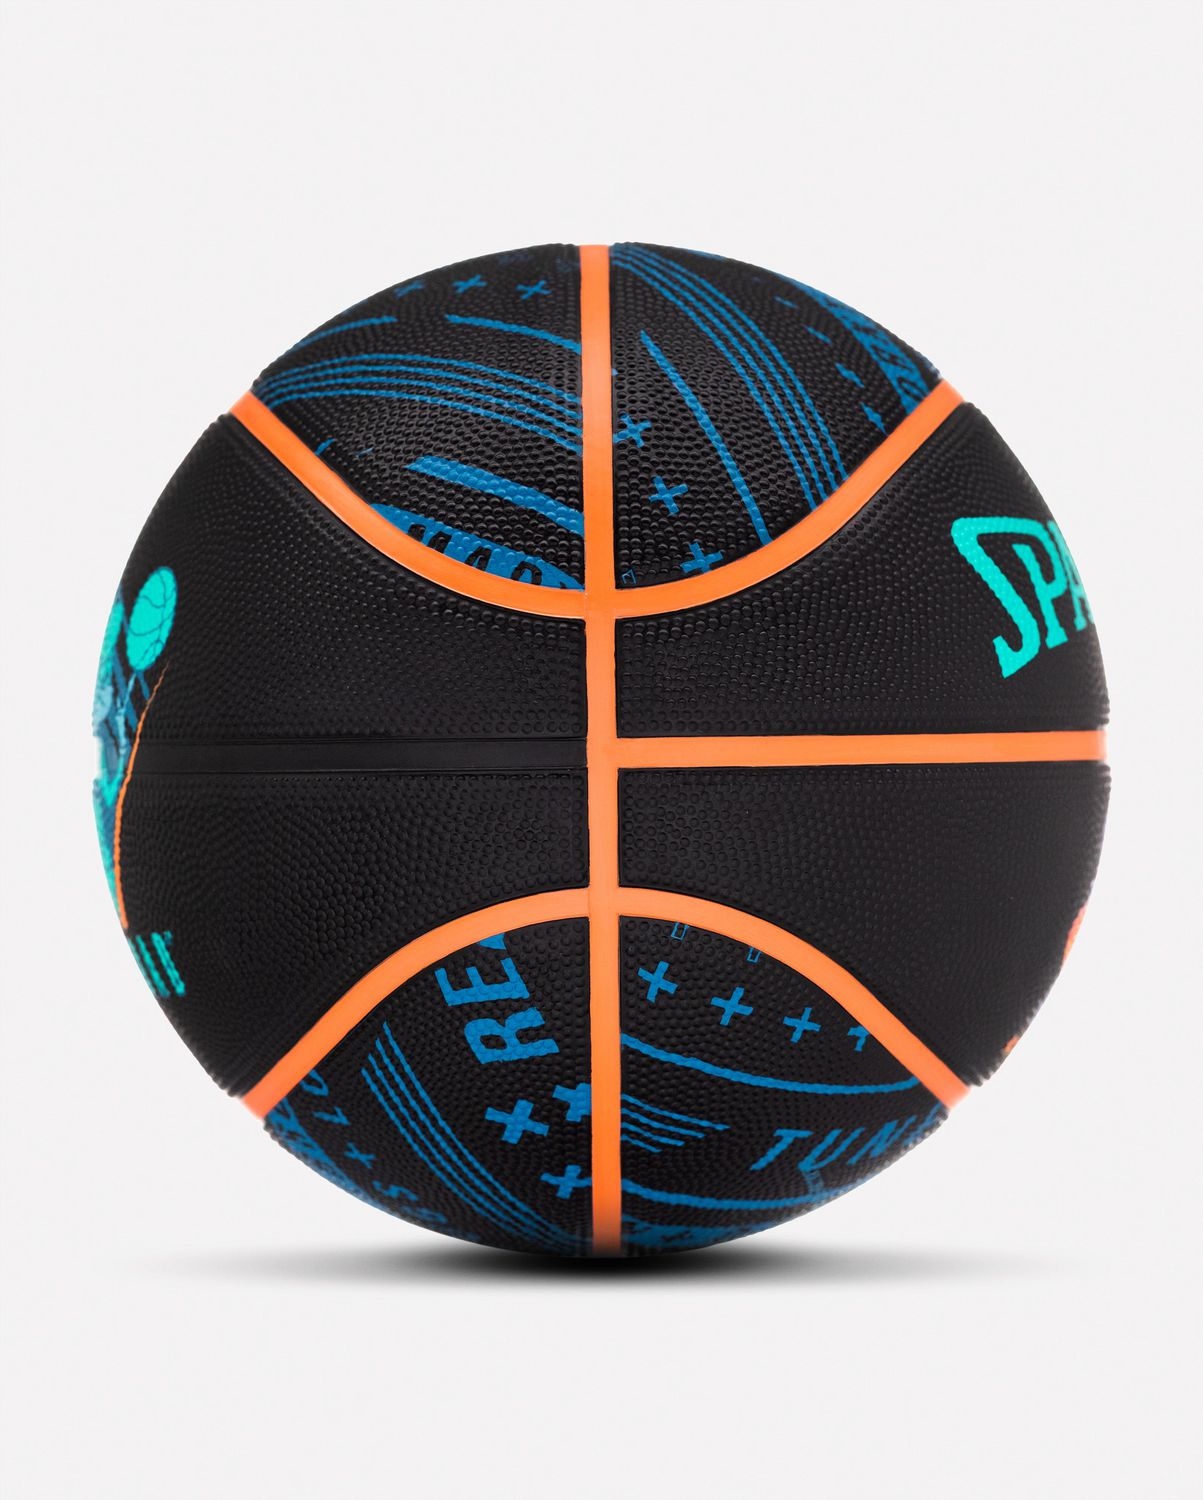 Spalding Space Jam Tune Squad Roster Size 7 Basketball | Walmart Canada